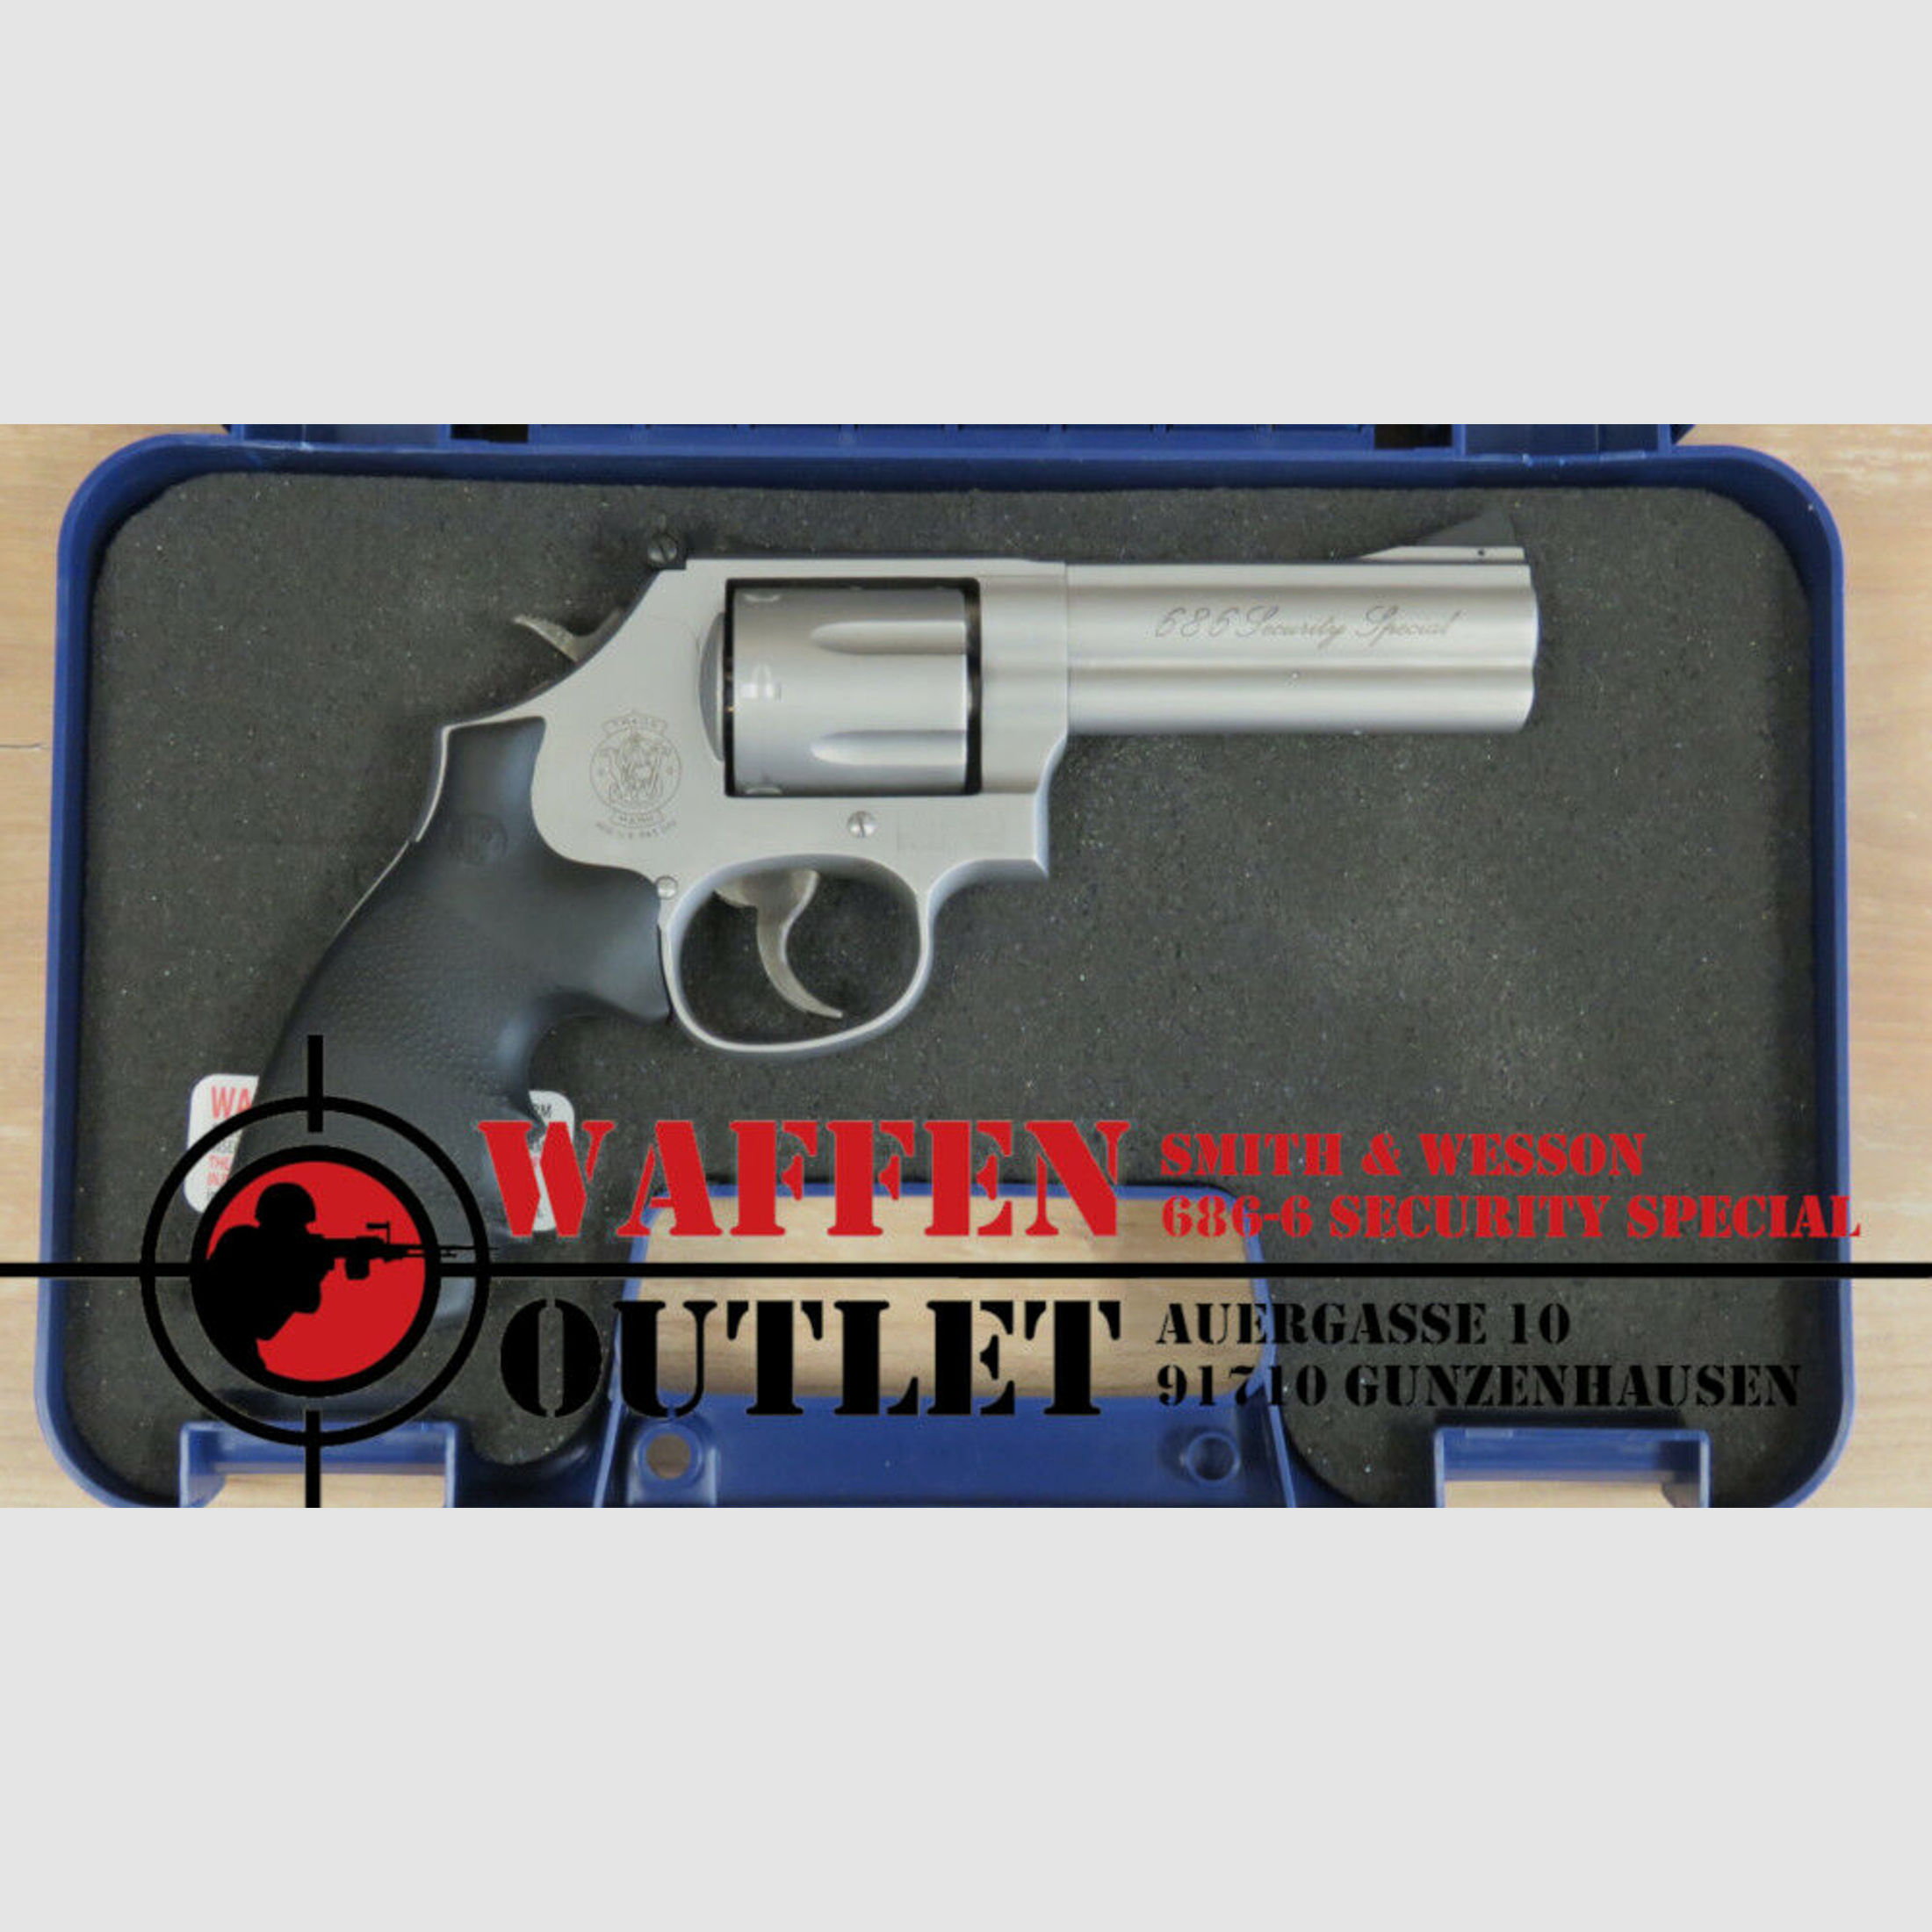 Smith & Wesson	 Model 686-6 Security Special 4" mit Gummigriff